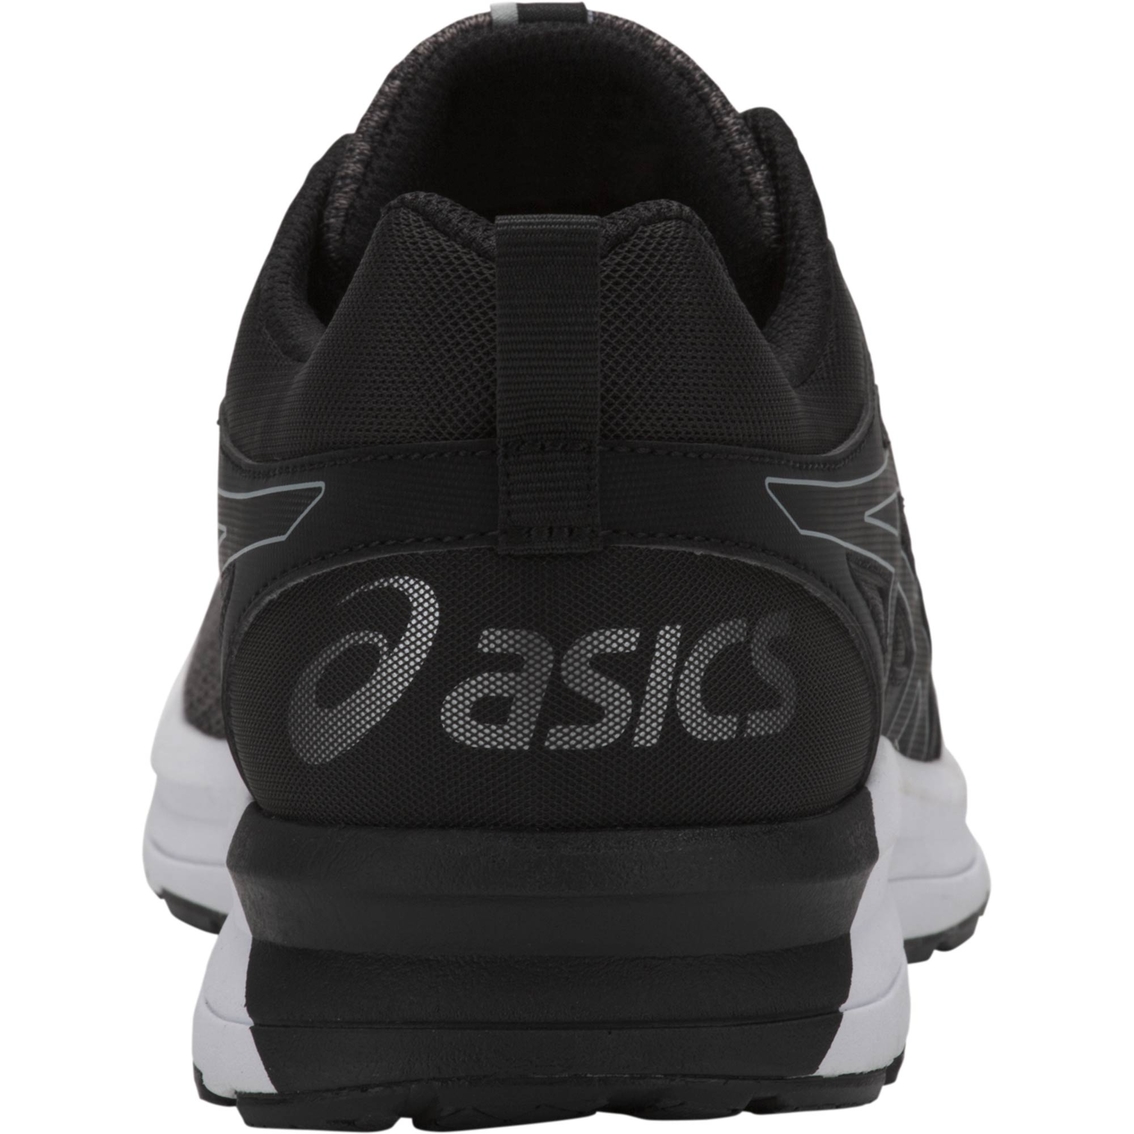 ASICS Men's Active Torrance Running Shoes - Image 4 of 4